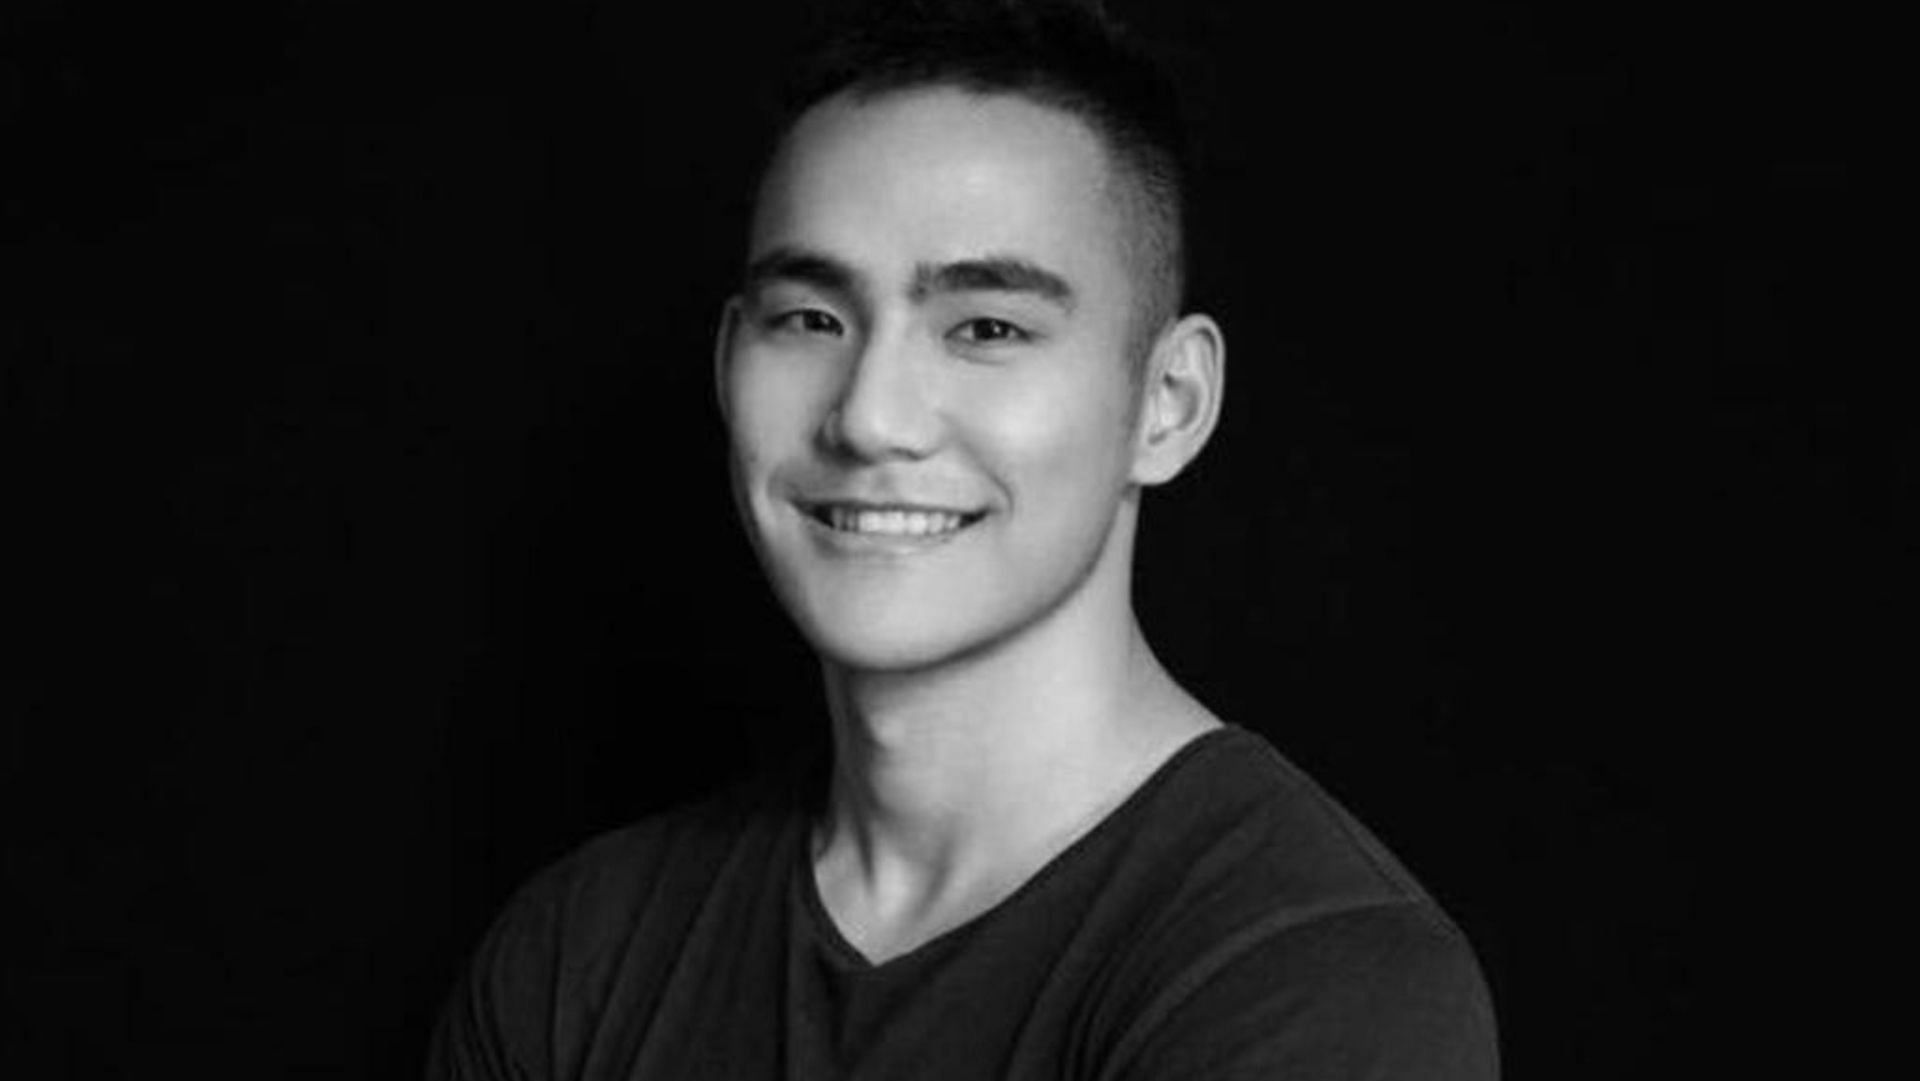 Tiantian Kullander was listed in Forbes 30 Under 30 in 2019. (Image via @WhaleChart/Twitter)